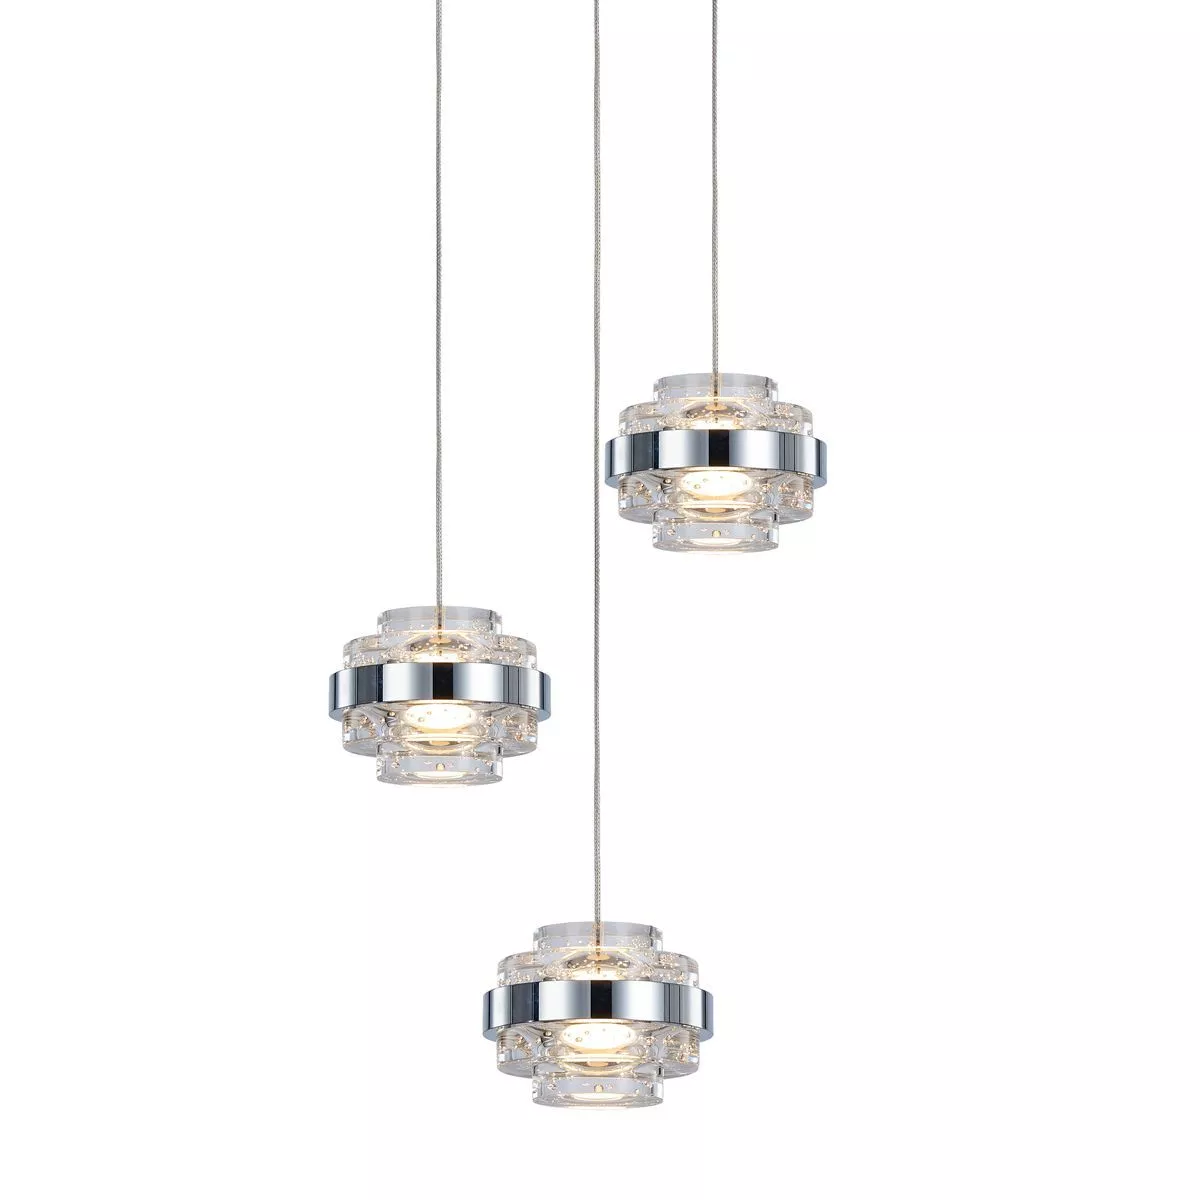 Подвесной светильник Delight Collection MD22030002 MD22030002-3A chrome/clear